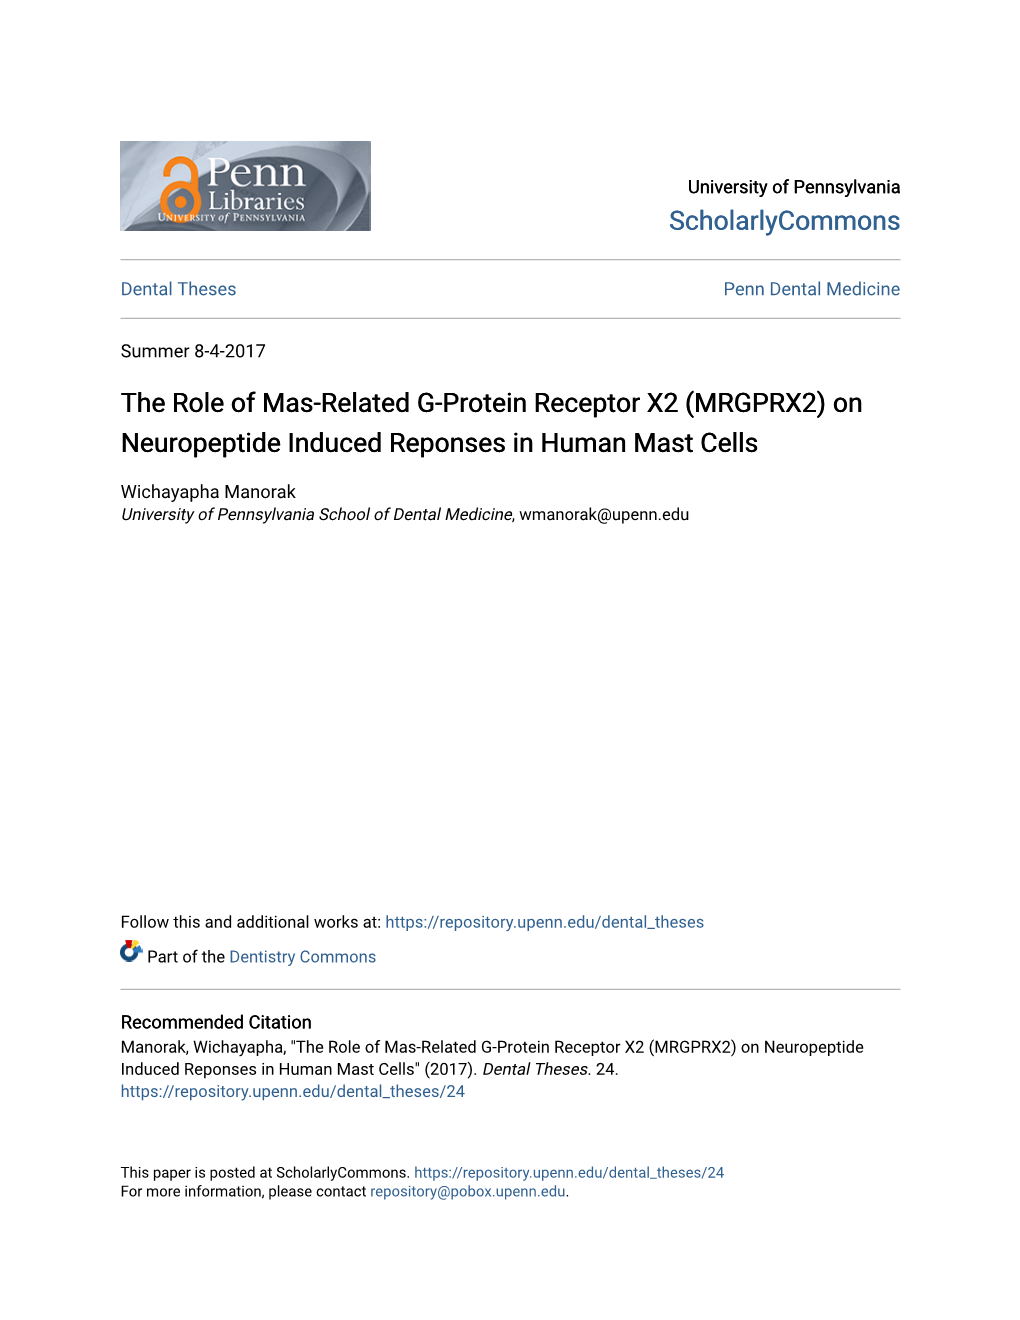 The Role of Mas-Related G-Protein Receptor X2 (MRGPRX2) on Neuropeptide Induced Reponses in Human Mast Cells